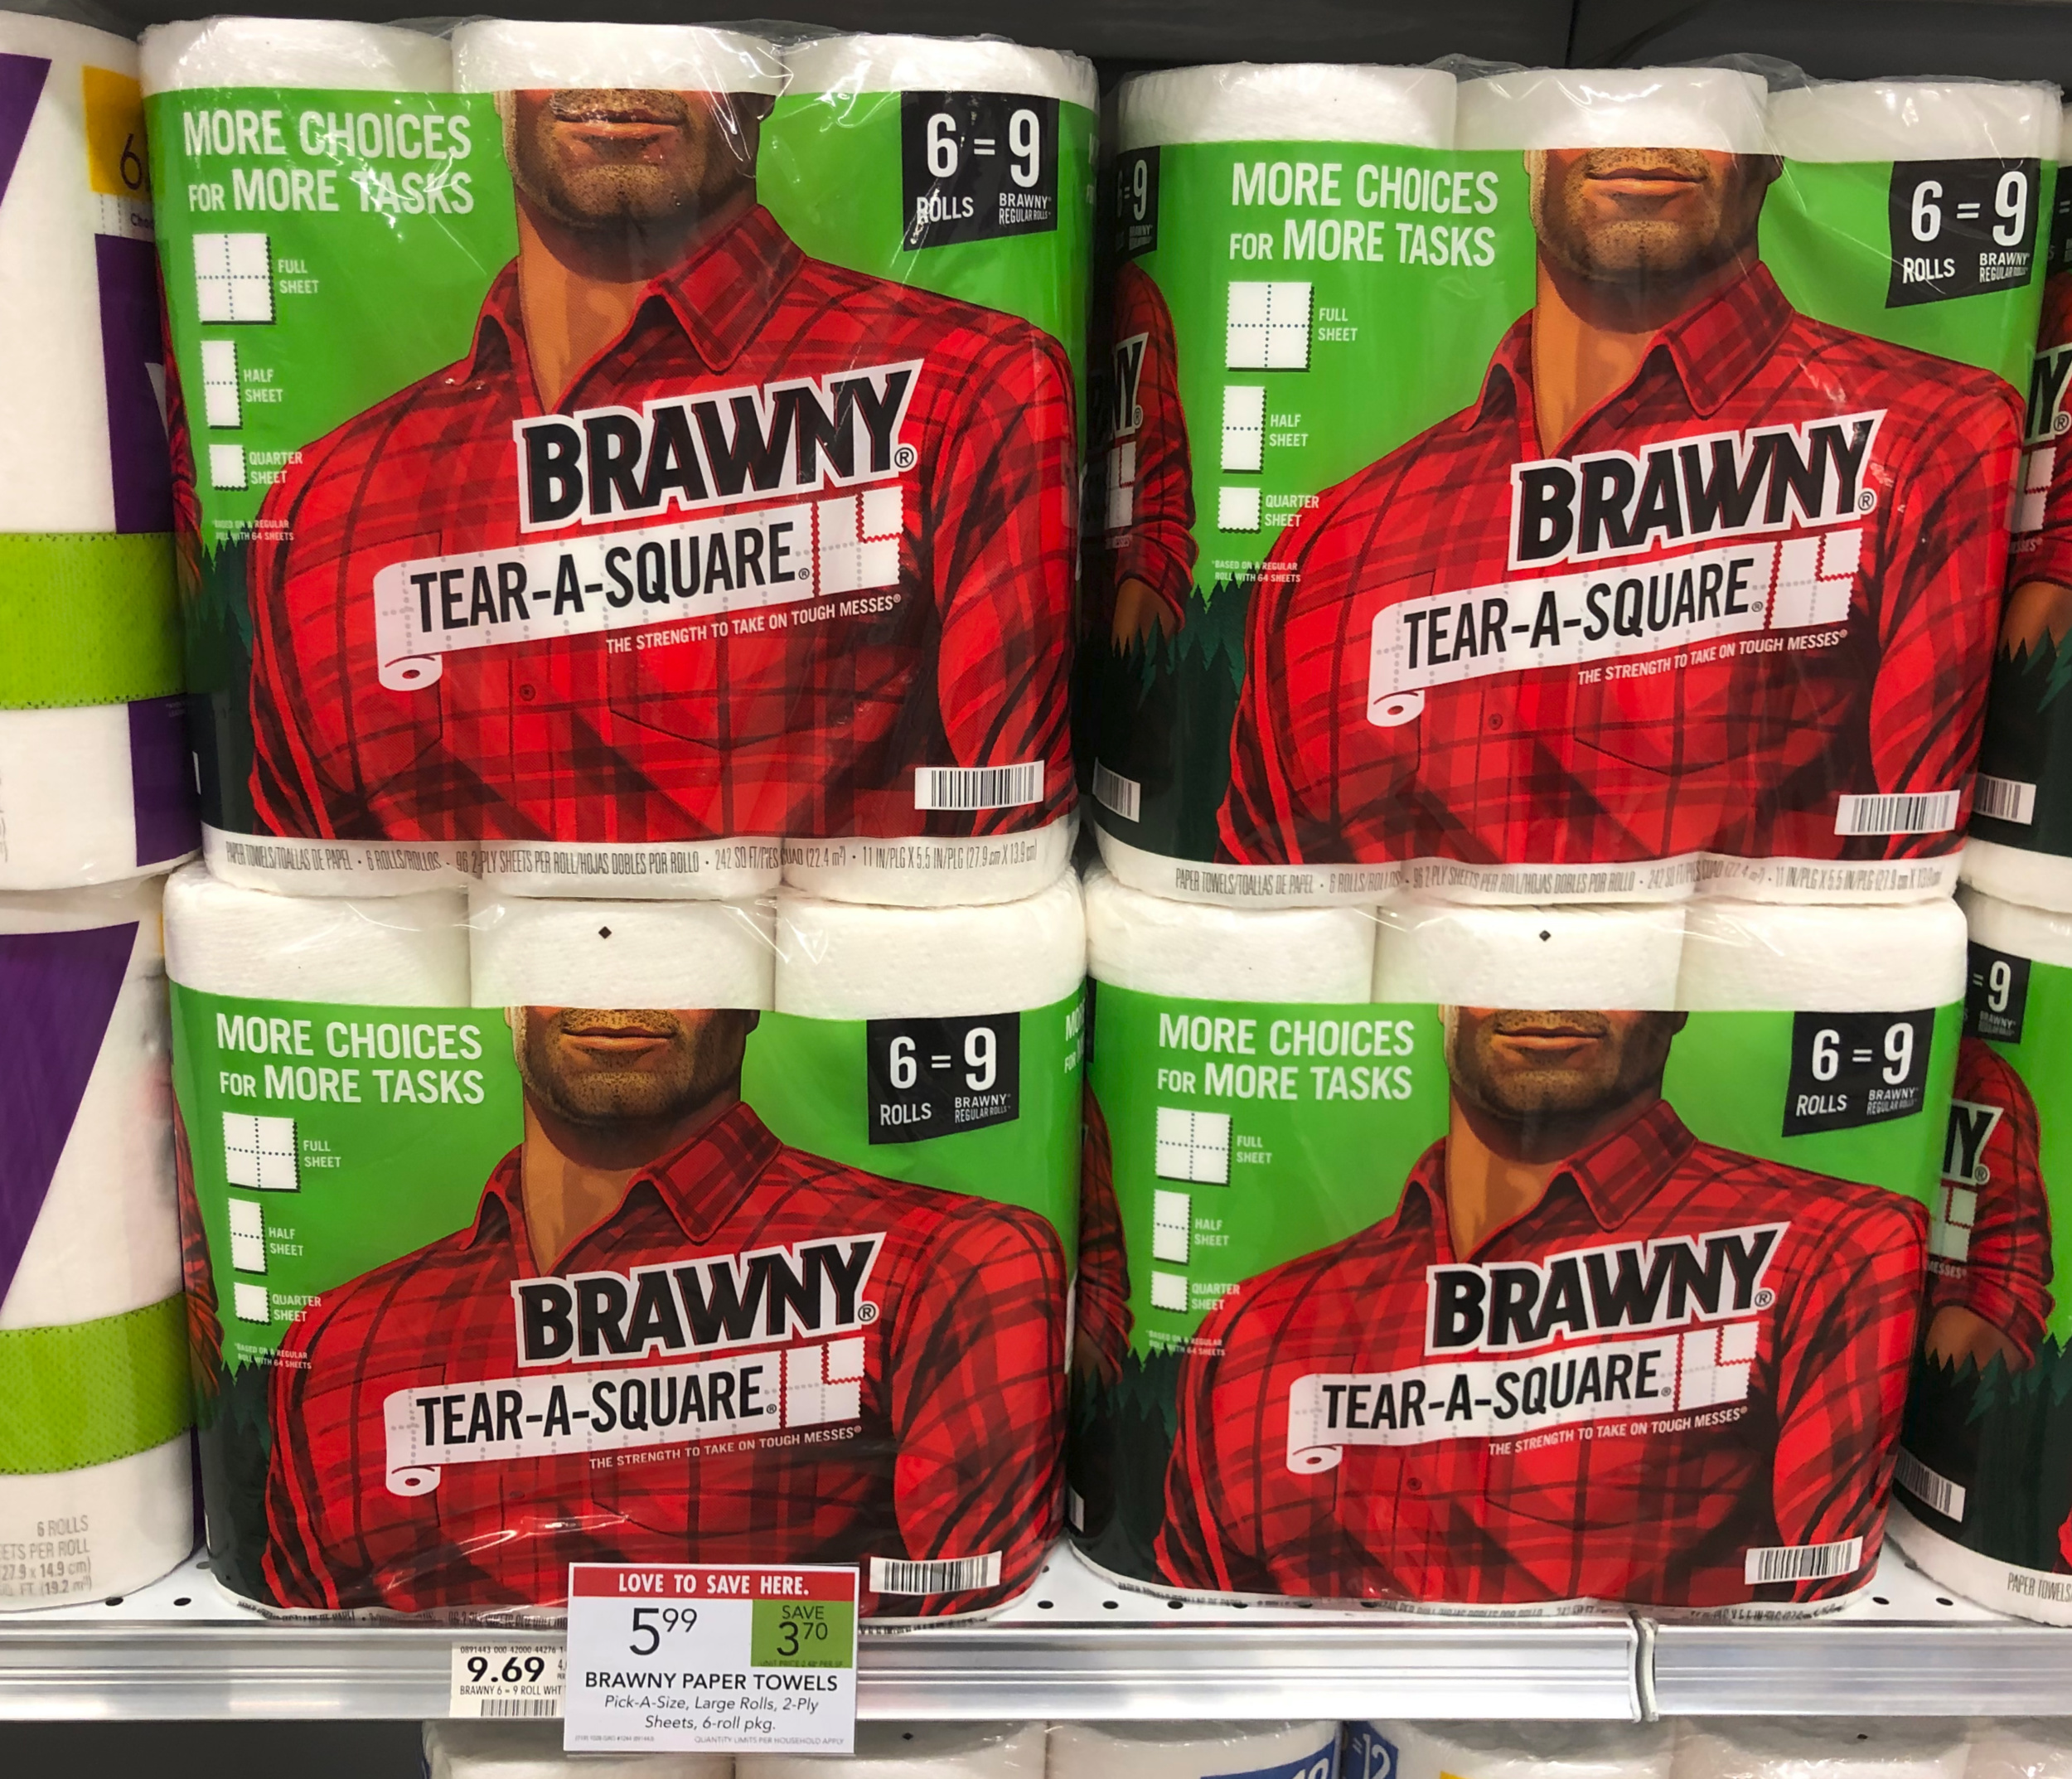 Brawny Paper Towels Are Just $4.50 At Publix on I Heart Publix 1